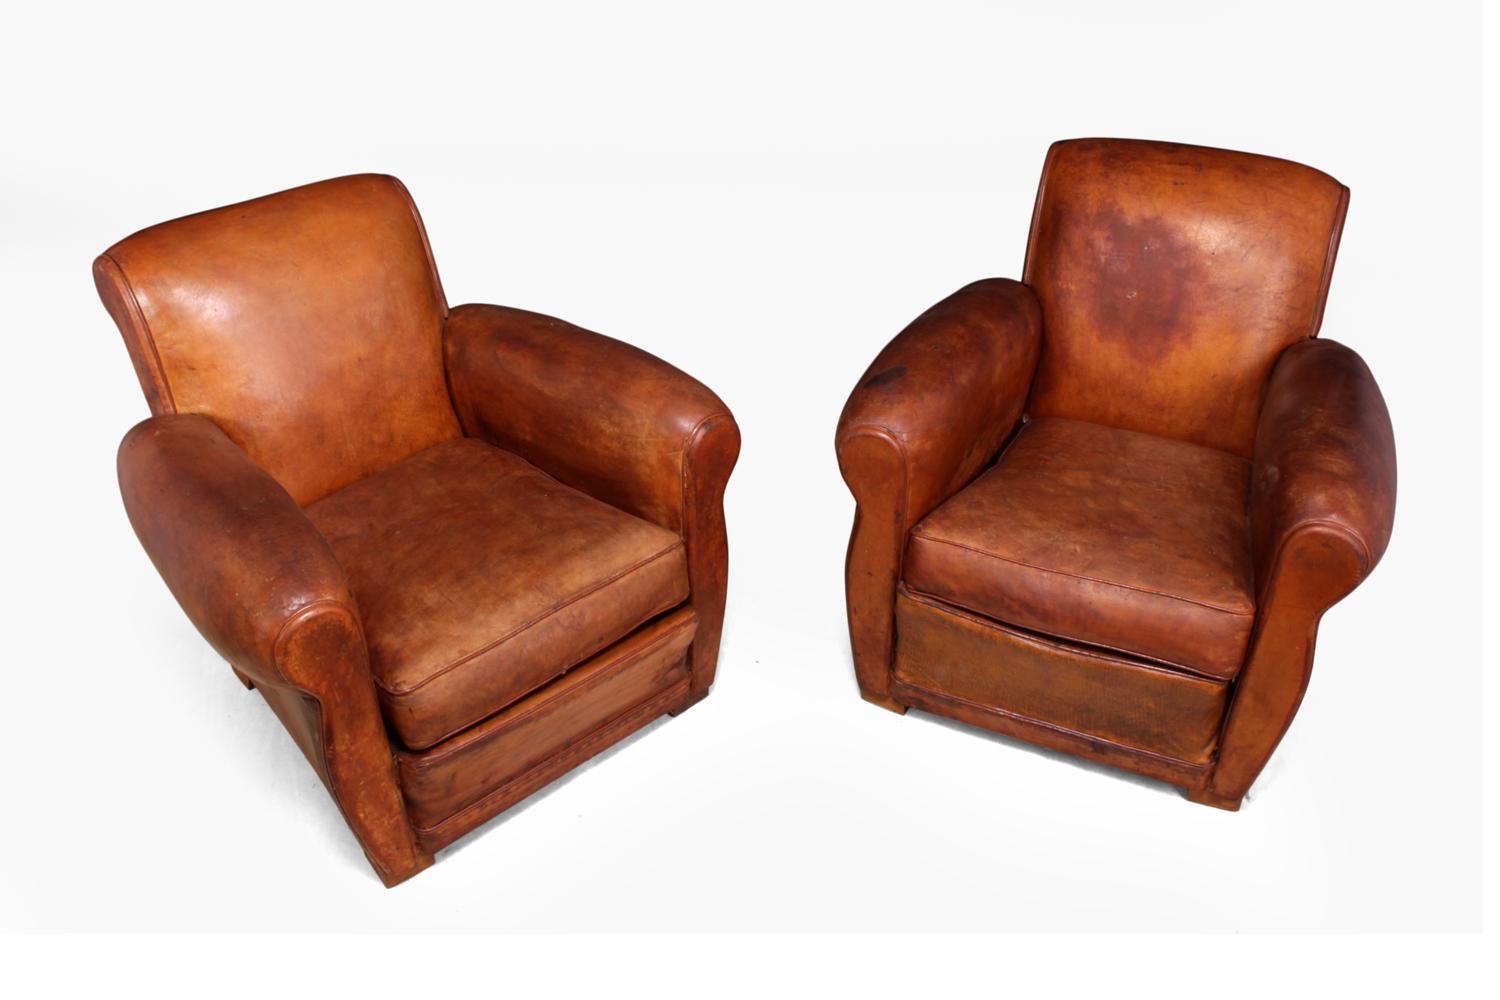 Pair of French leather club chairs
This pair of leather club chairs were produced in France in the 1940s, they have a few repairs and the leather has been fed and conditioned and is soft and strong, they are fully sprung seat back and arms with a